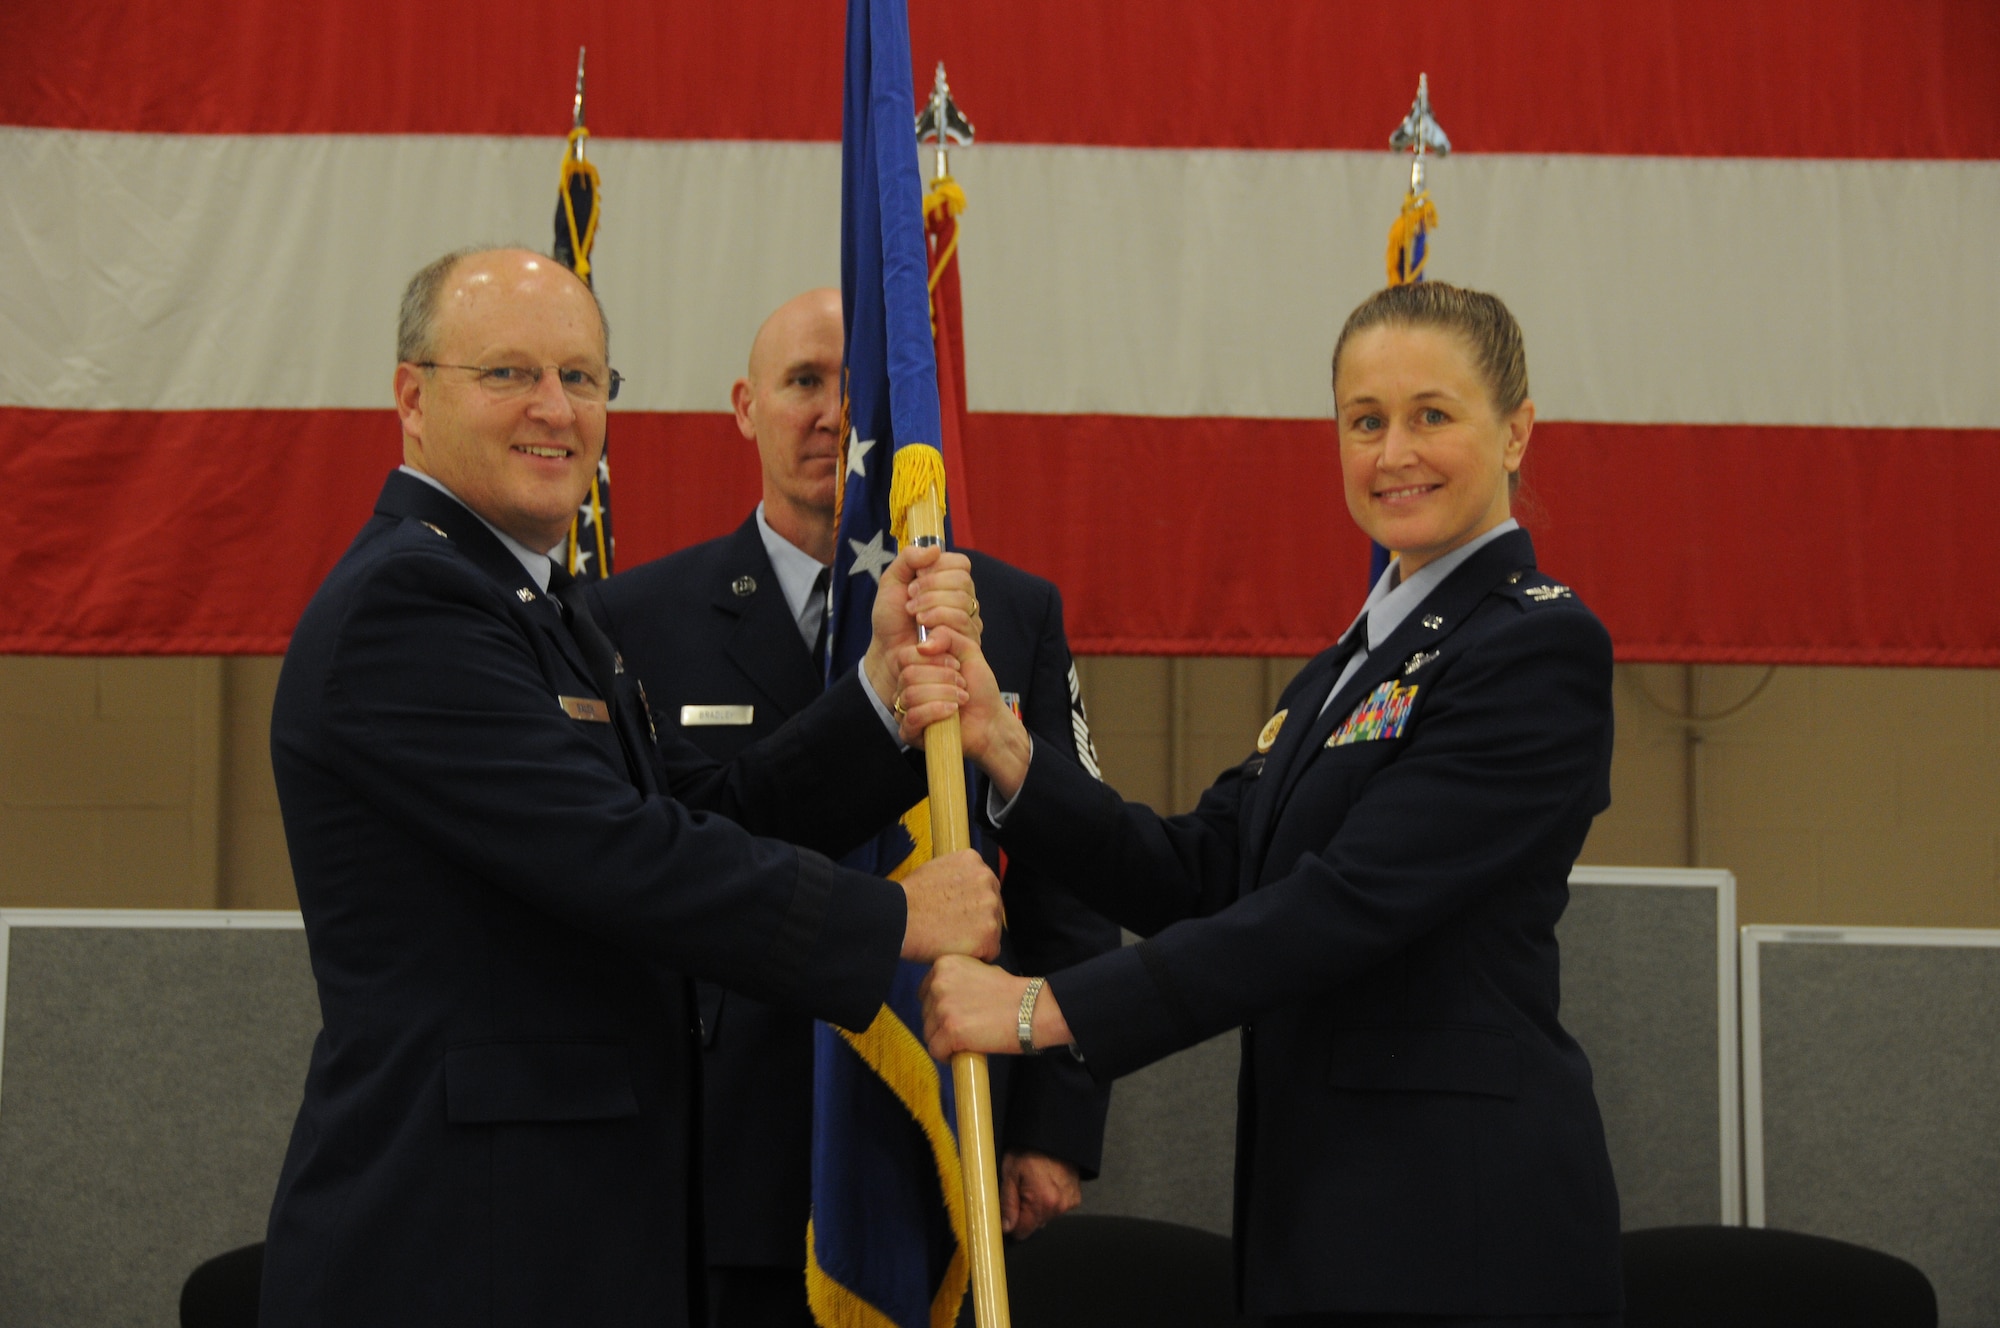 Col. Bobbi Doorenbos accepts the guidon from Brig. Gen. Travis Balch, commander of the Air National Guard, during a change of command ceremony held at Ebbing Air National Guard Base, Fort Smith, Ark., Jan. 11, 2015. Doorenbos, former commander of the 214th Reconnaissance Group, assumed command of the 188th Wing from Col. Mark Anderson. (U.S. Air National Guard photo by Airman 1st Class Cody Martin/released)